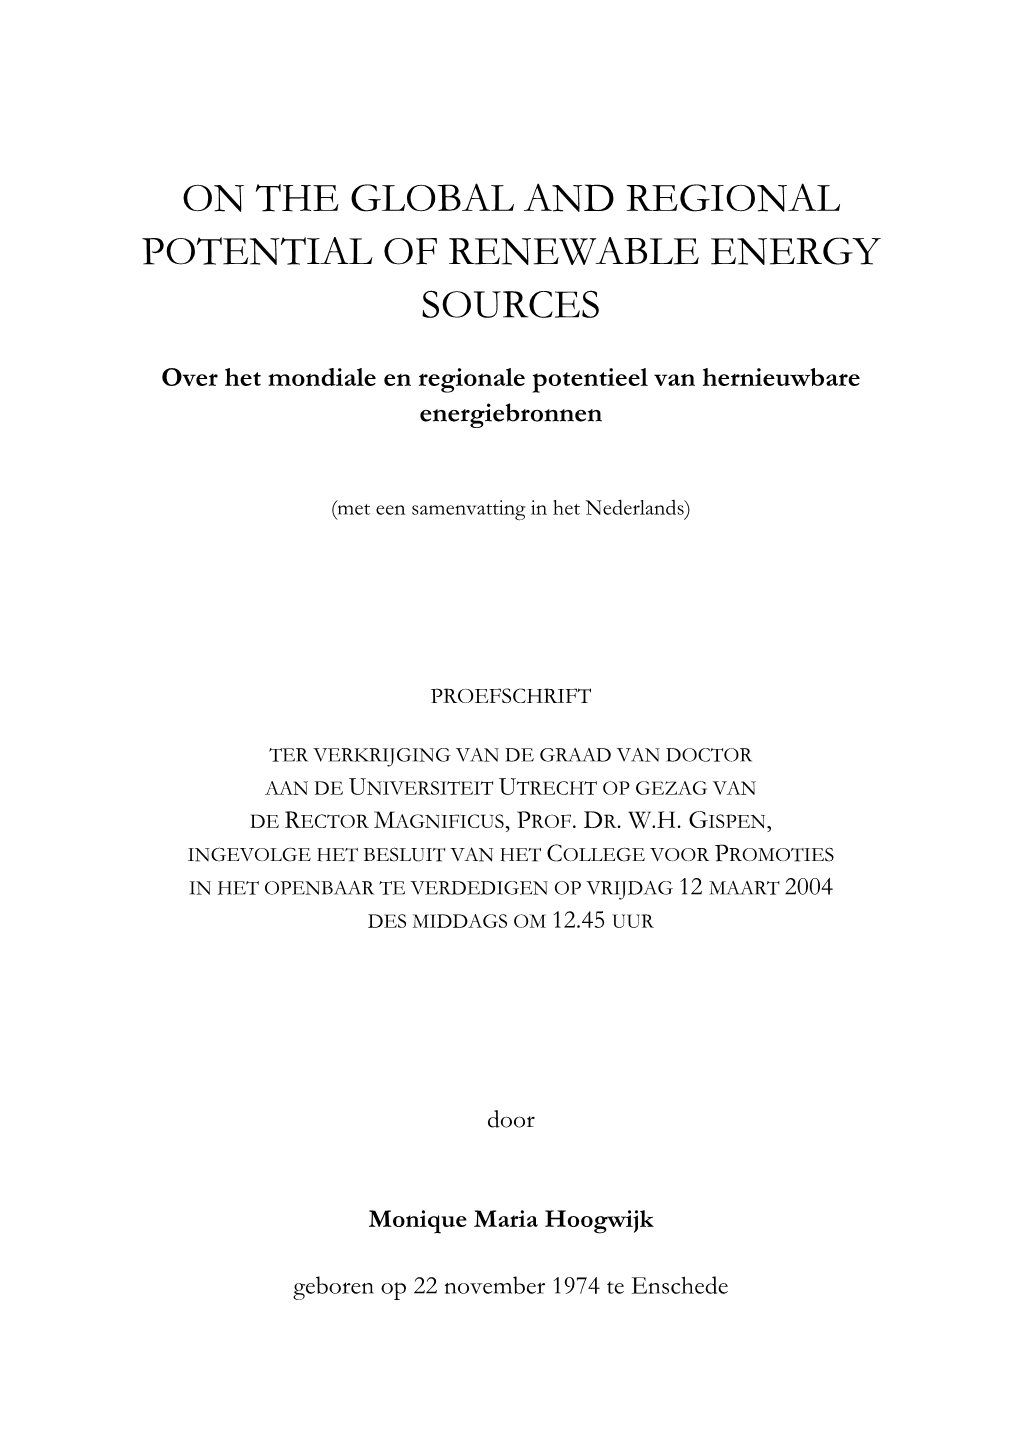 On the Global and Regional Potential of Renewable Energy Sources